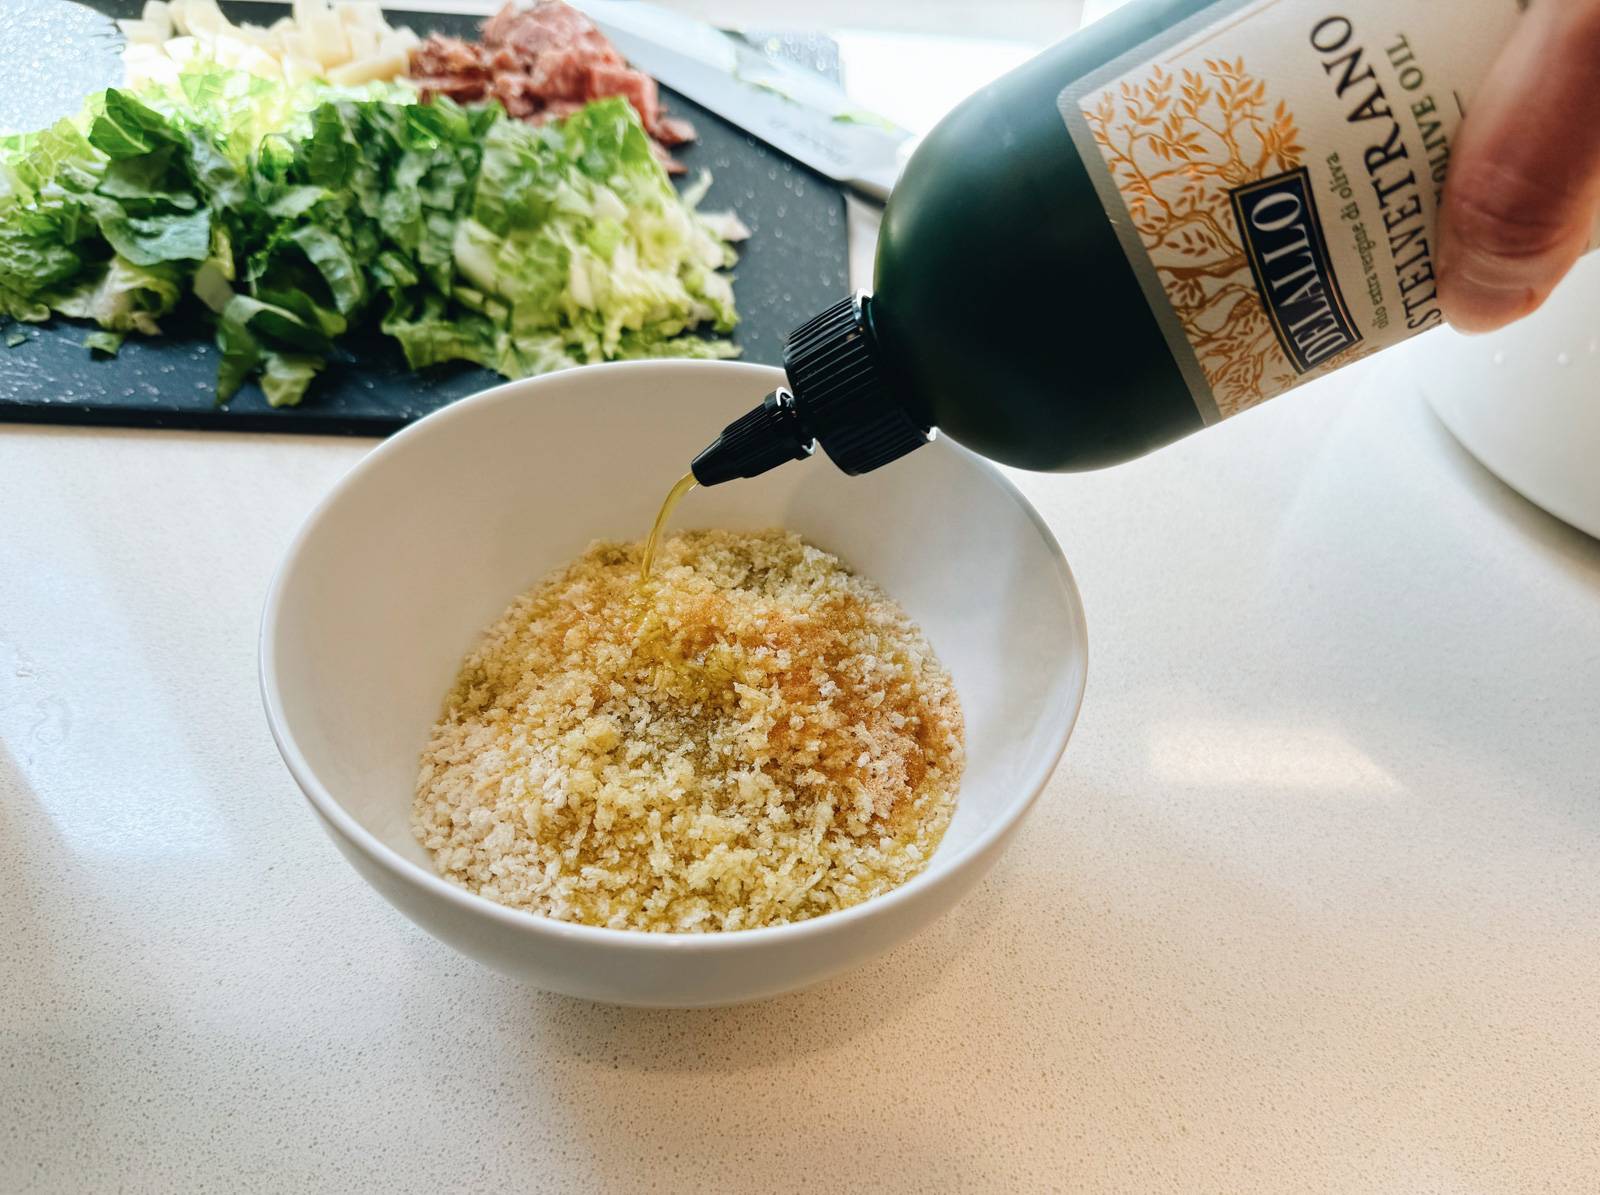 Squeezing olive oil into a bowl of breadcrumbs.